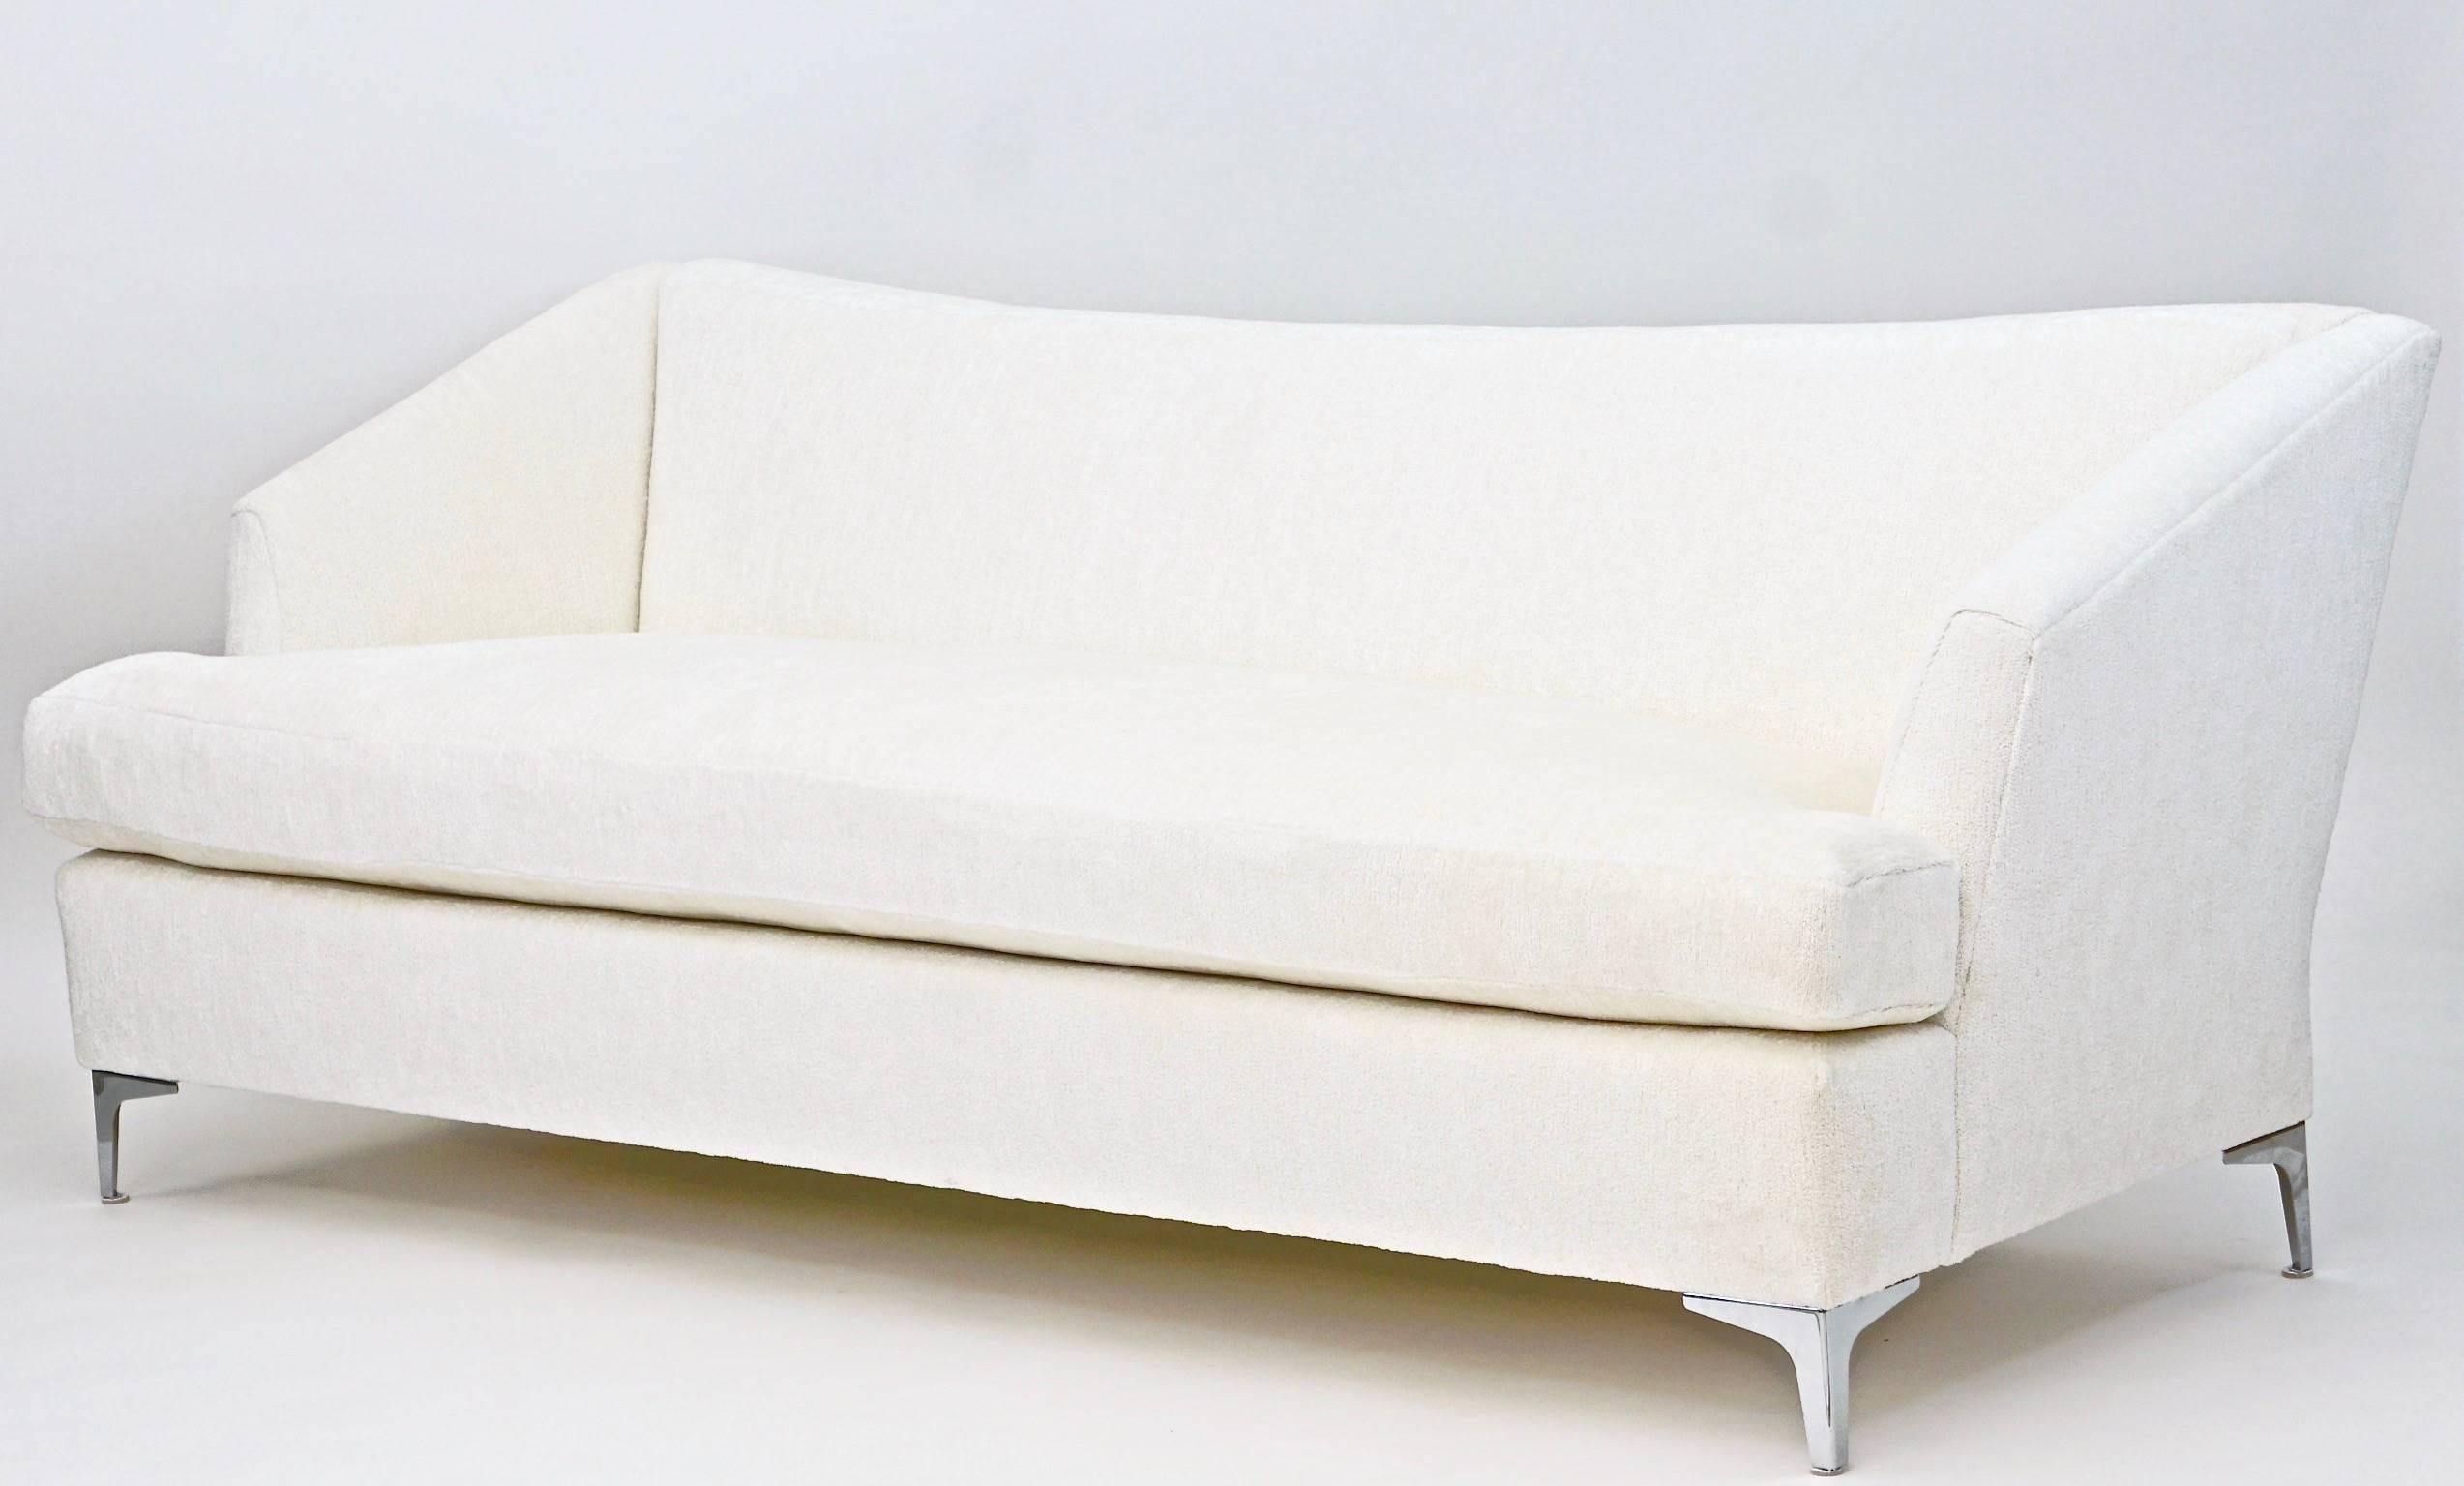 Olson single cushion Sofa (New-Made) is upholstered in Romo Bagheera Moonbeam upholstery fabric. Maple and birch frame with contemporary chrome legs. Creamy white fabric is from Romo (Bagherra Moonbeam) and is sumptuously soft viscose chenille - 46%